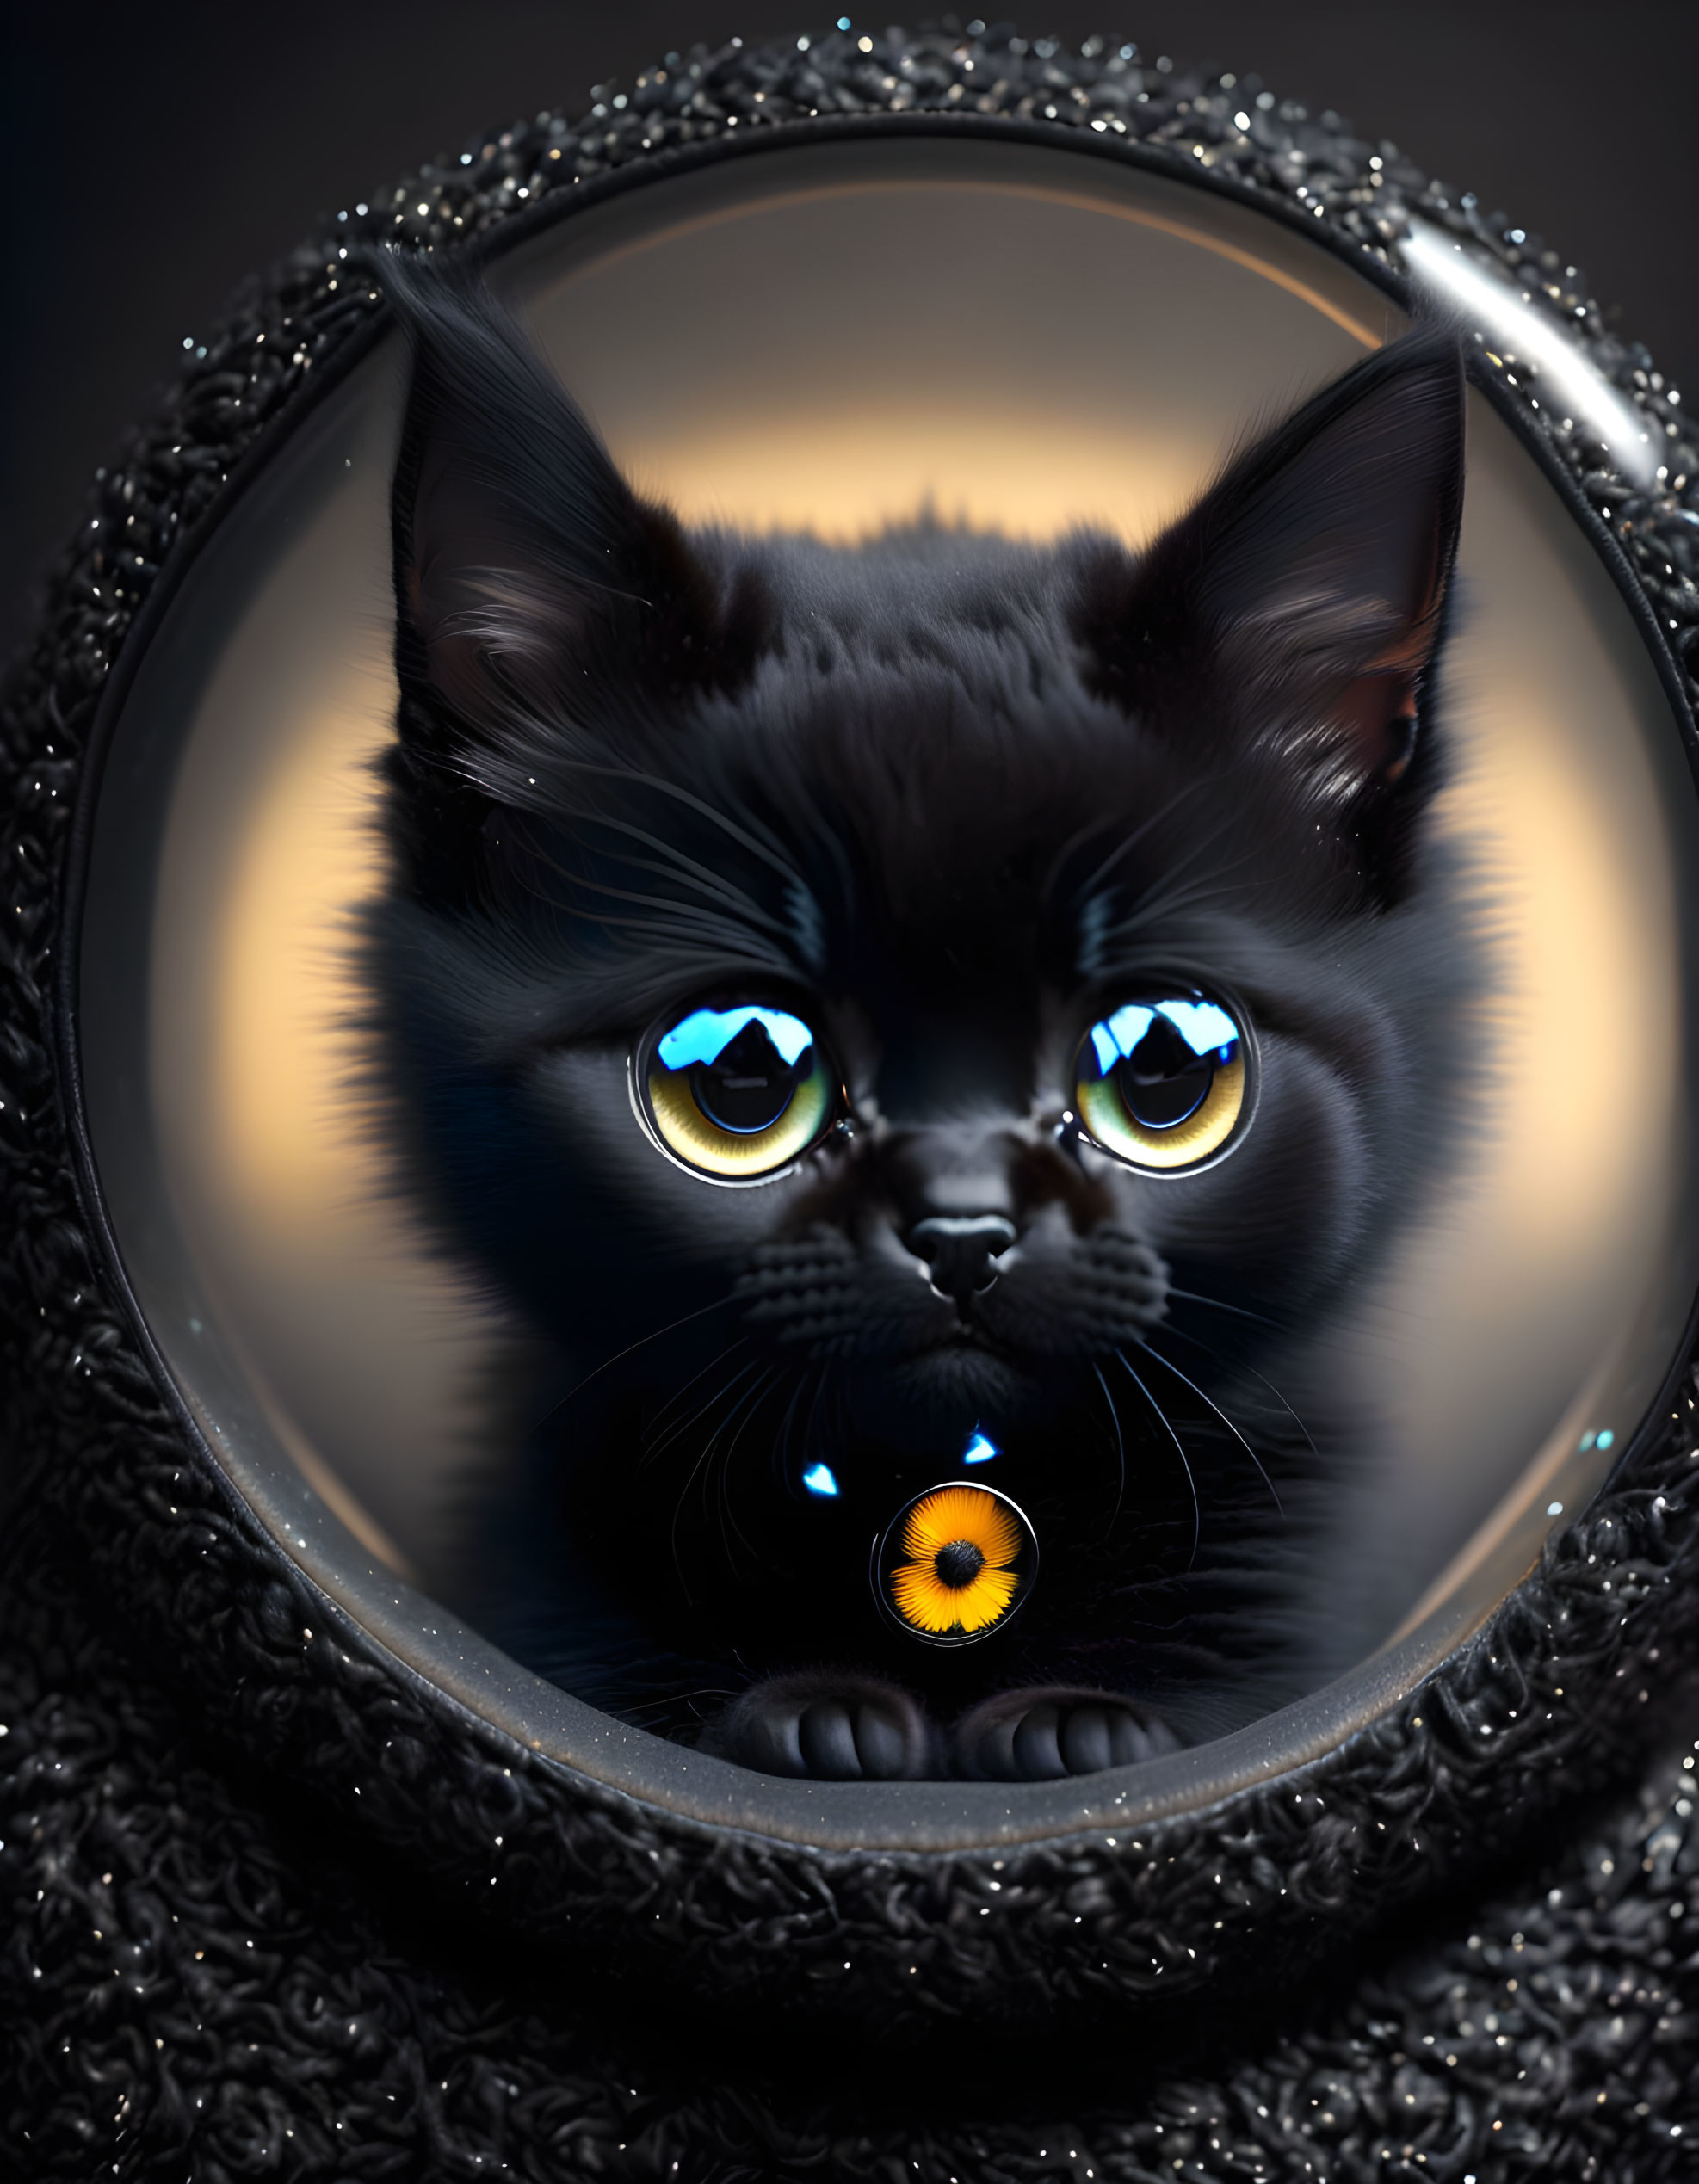 Digital Artwork: Black Cat with Blue Eyes in Glass Bubble on Dusk Background